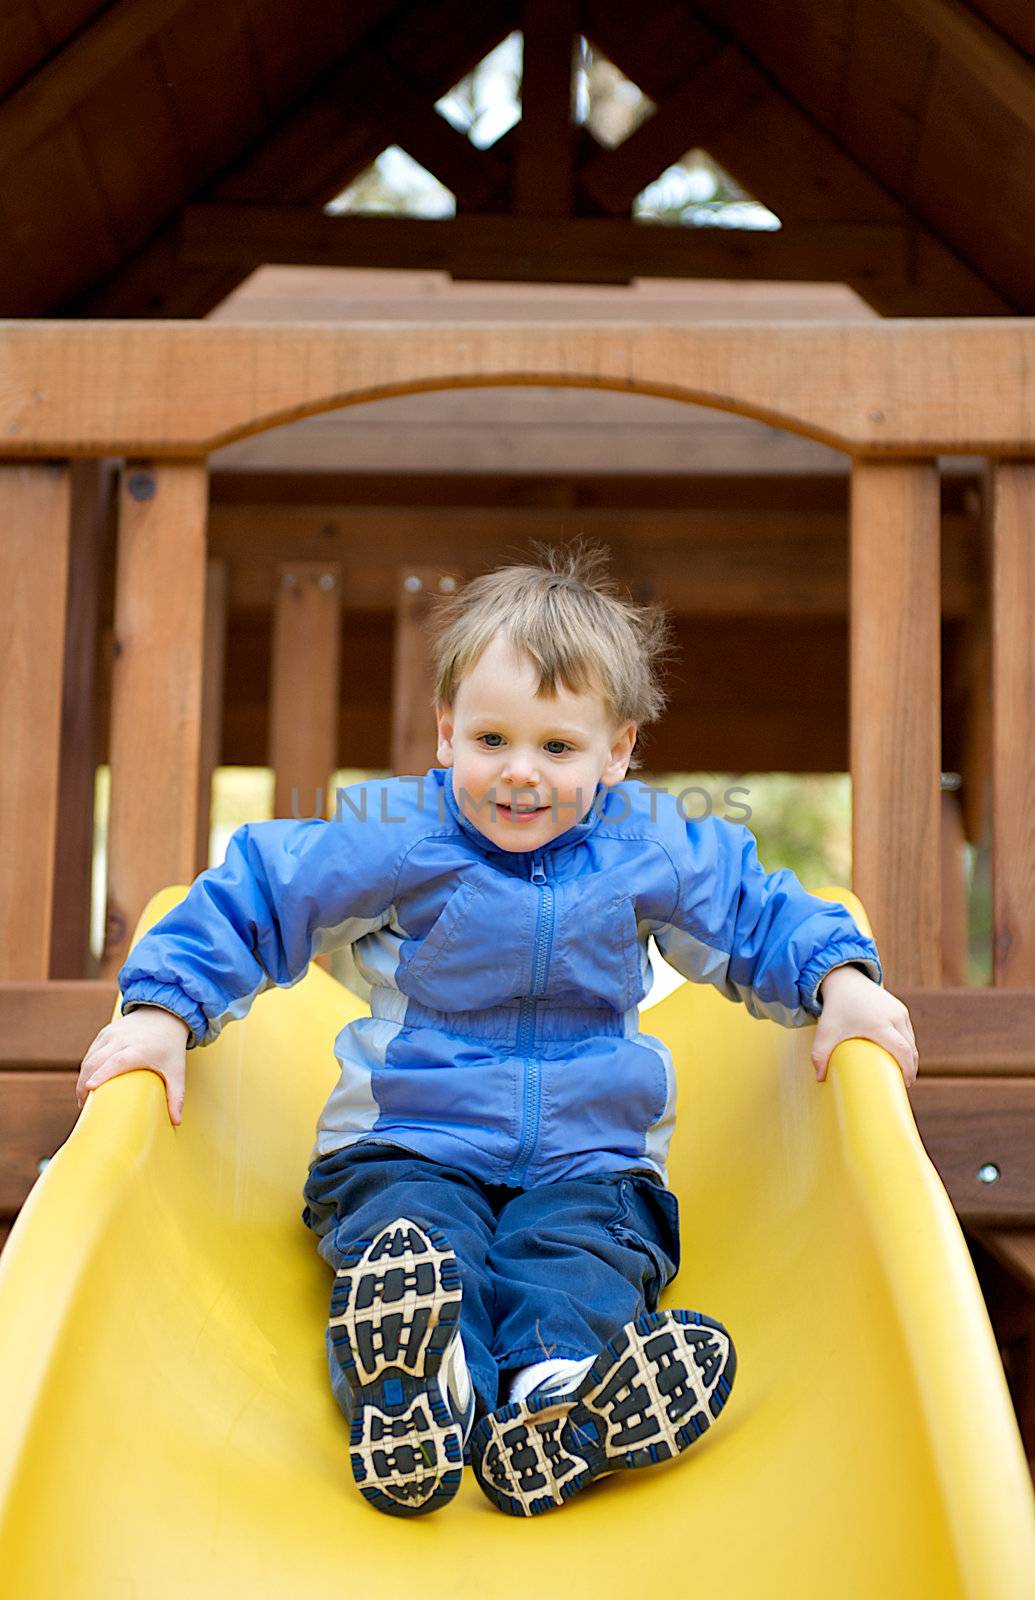 Young boy smiling while sliding down a sliding board in a playground.